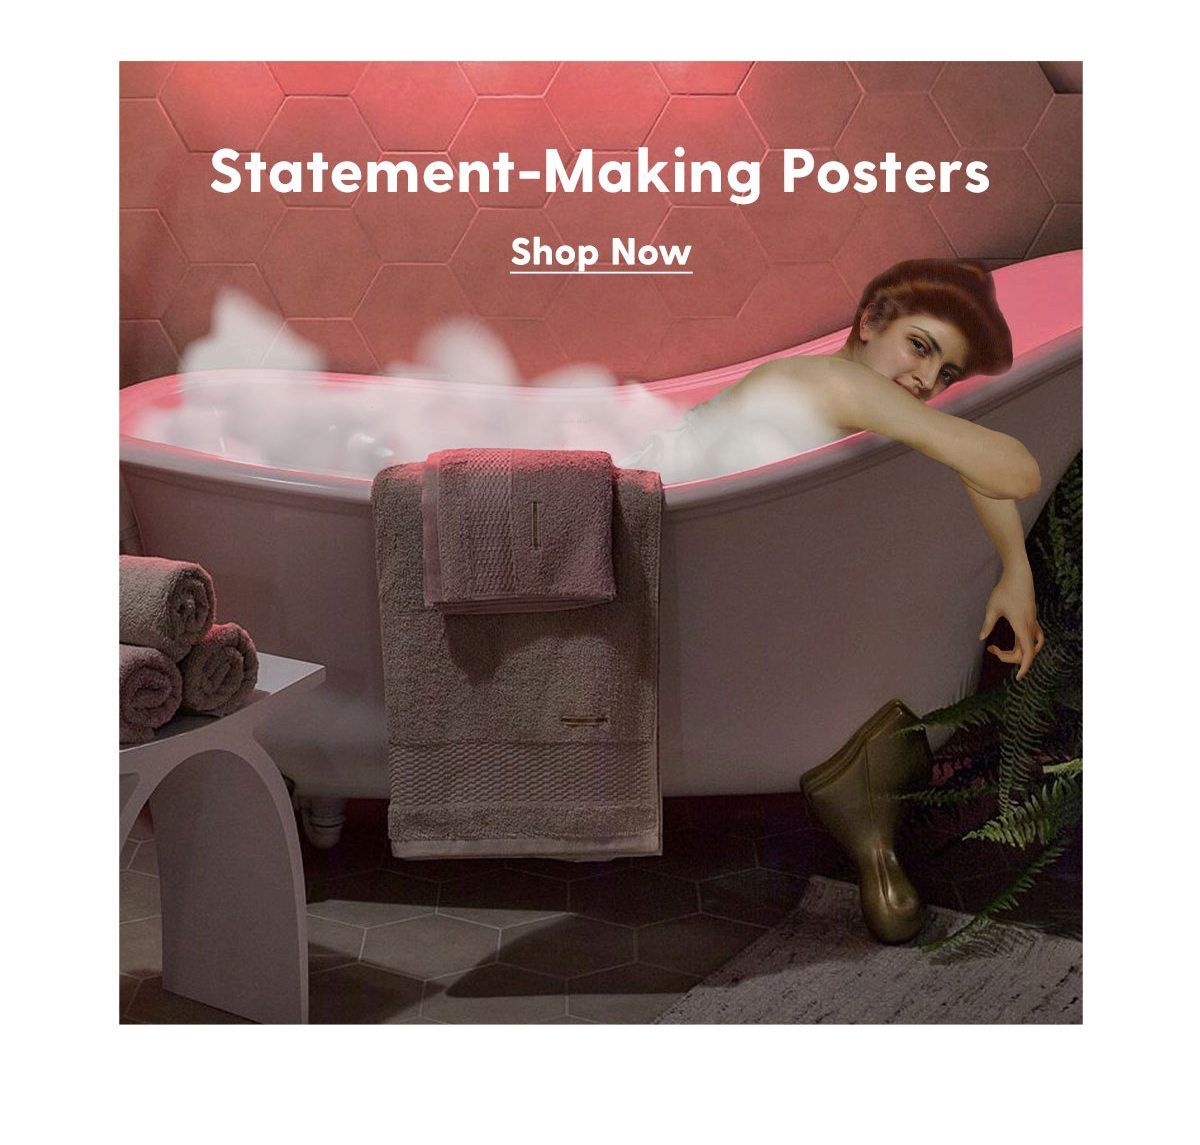 Statement-Making Posters Shop Now